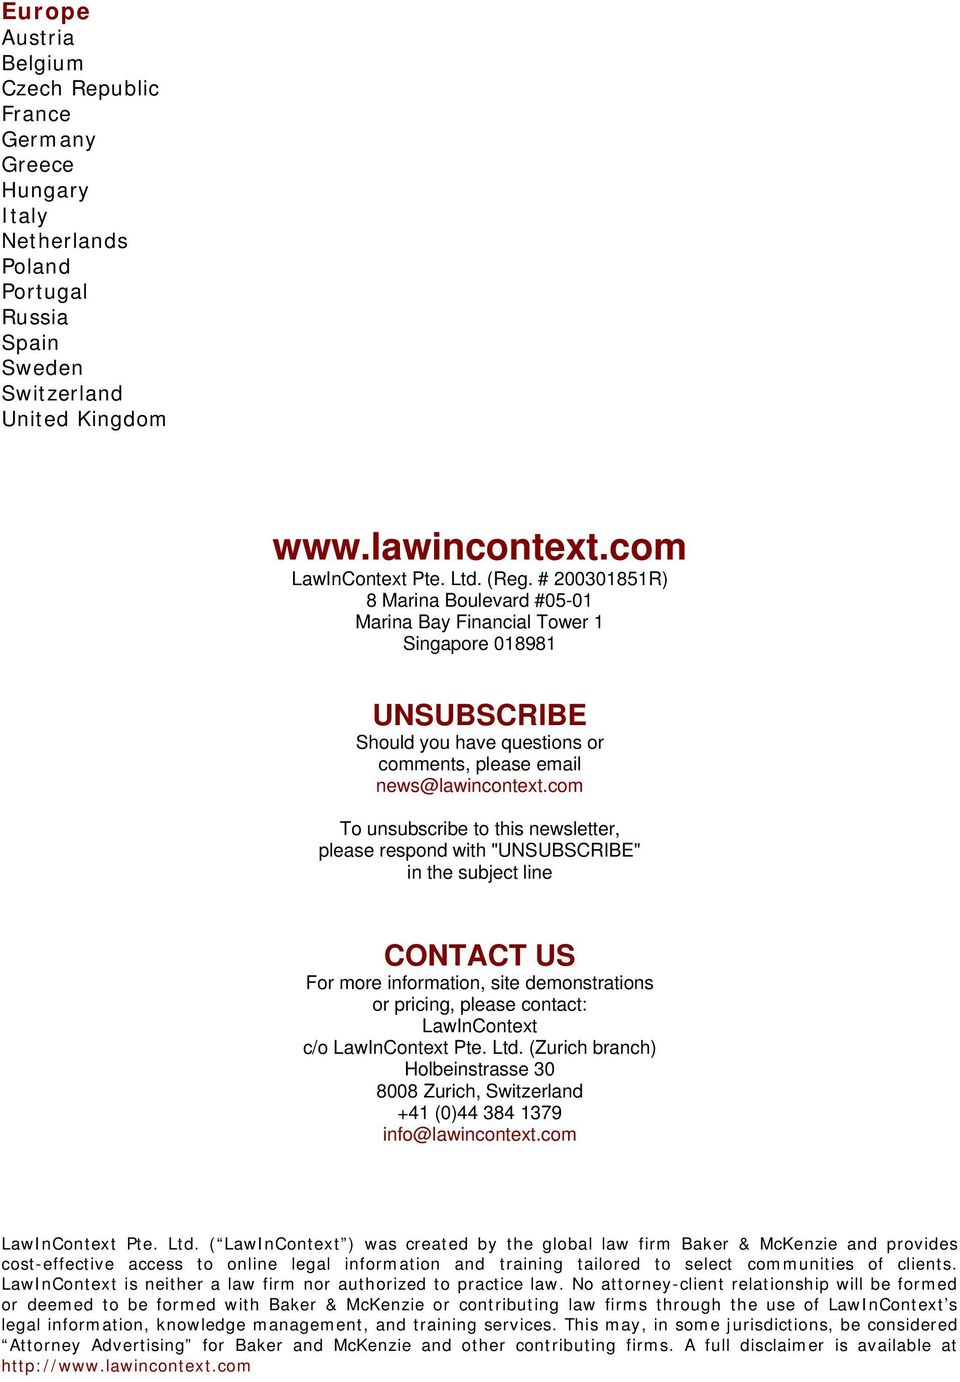 com To unsubscribe to this newsletter, please respond with "UNSUBSCRIBE" in the subject line CONTACT US For more information, site demonstrations or pricing, please contact: LawInContext c/o